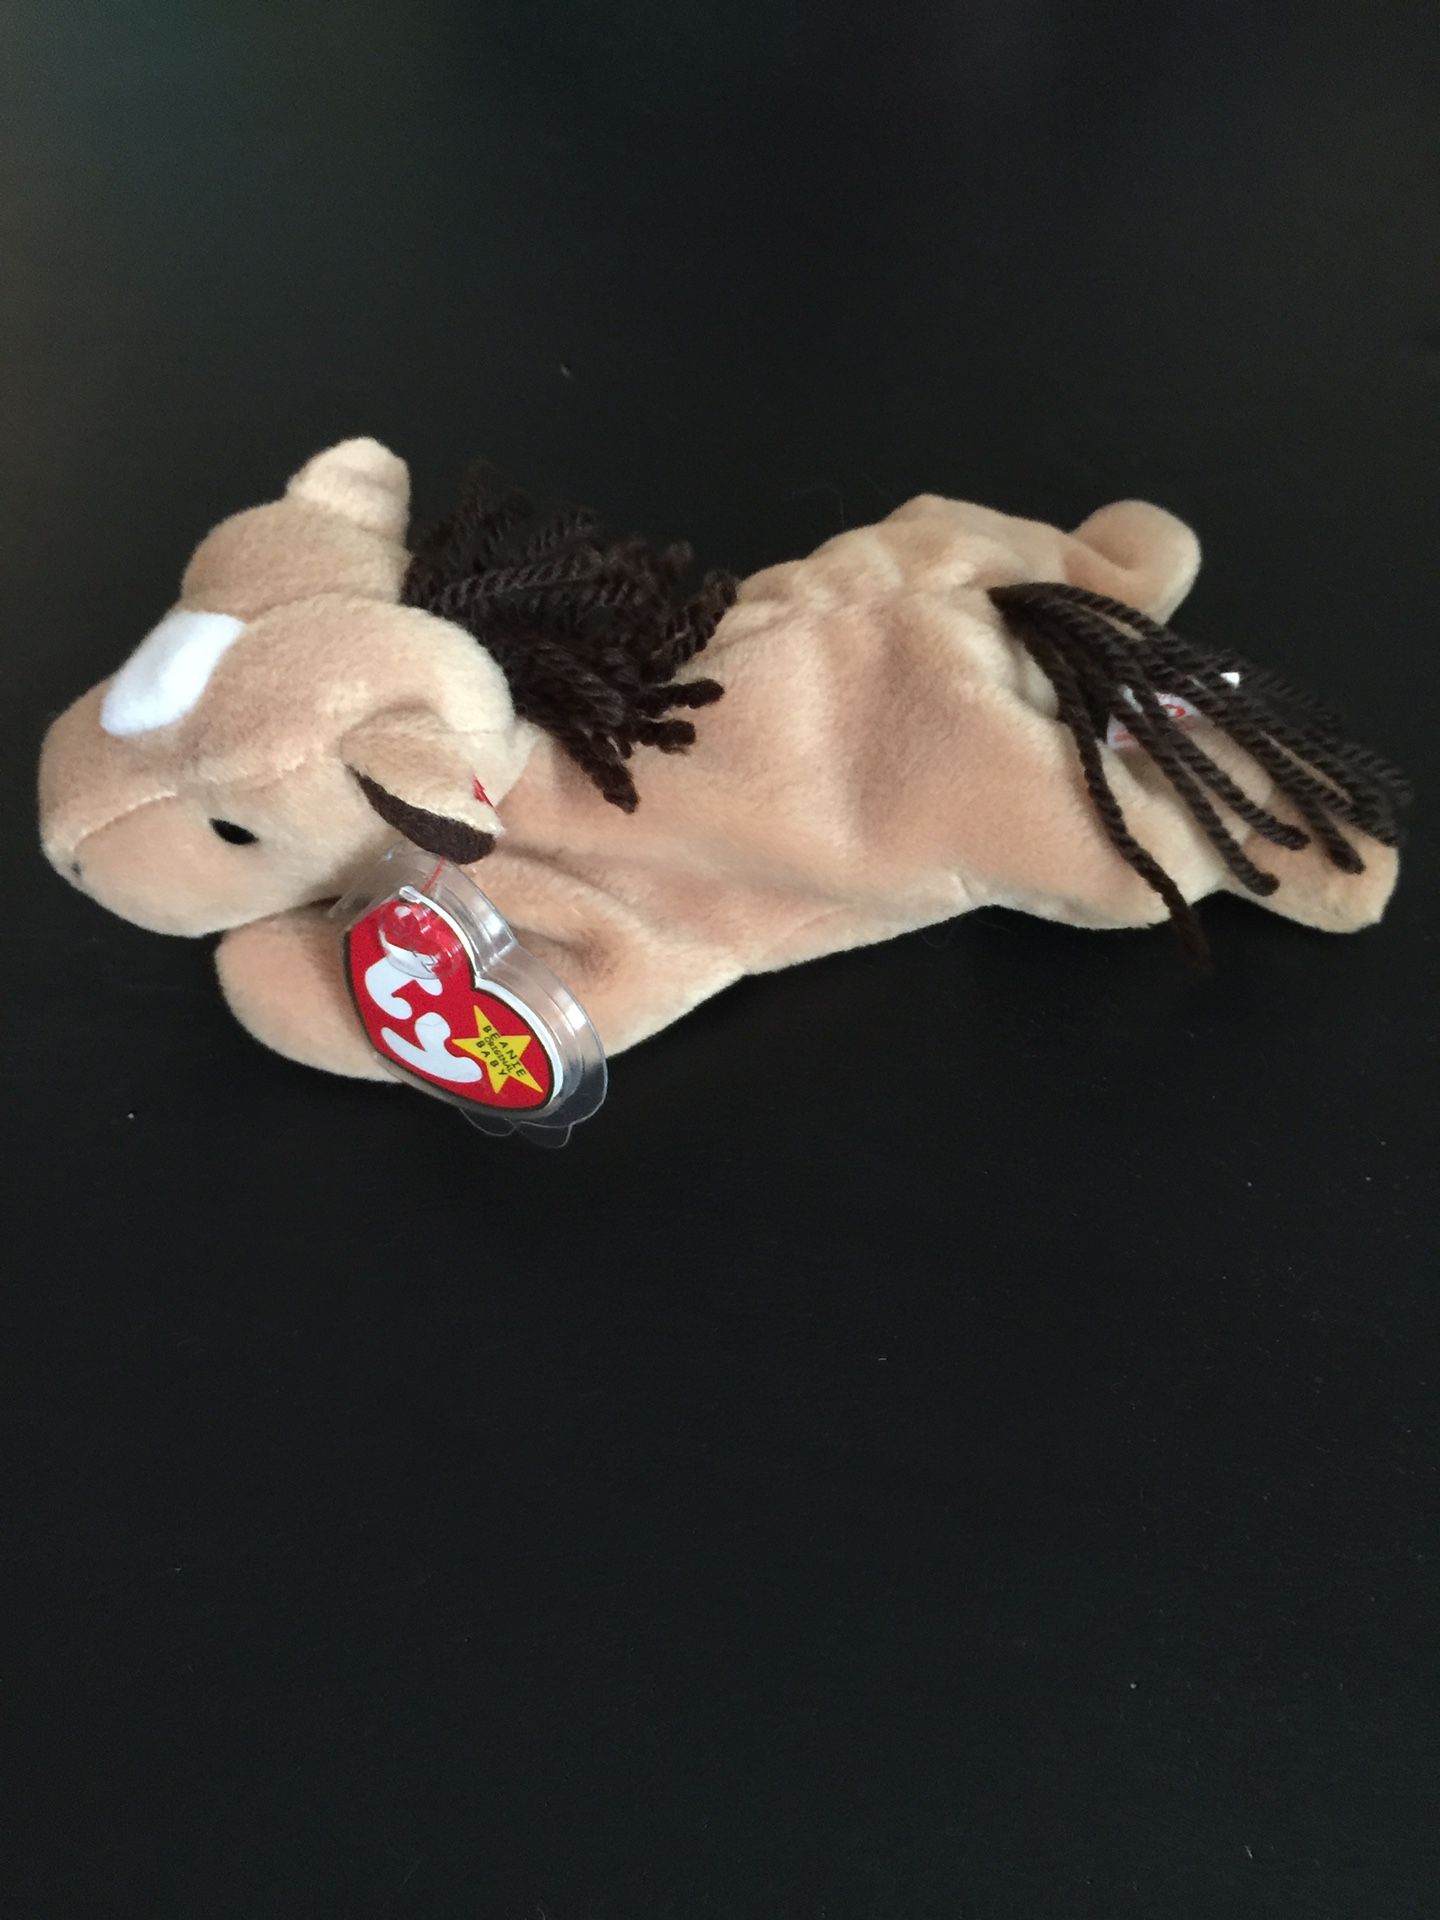 New Beanie Baby Horse $1.00 A Great Buy!